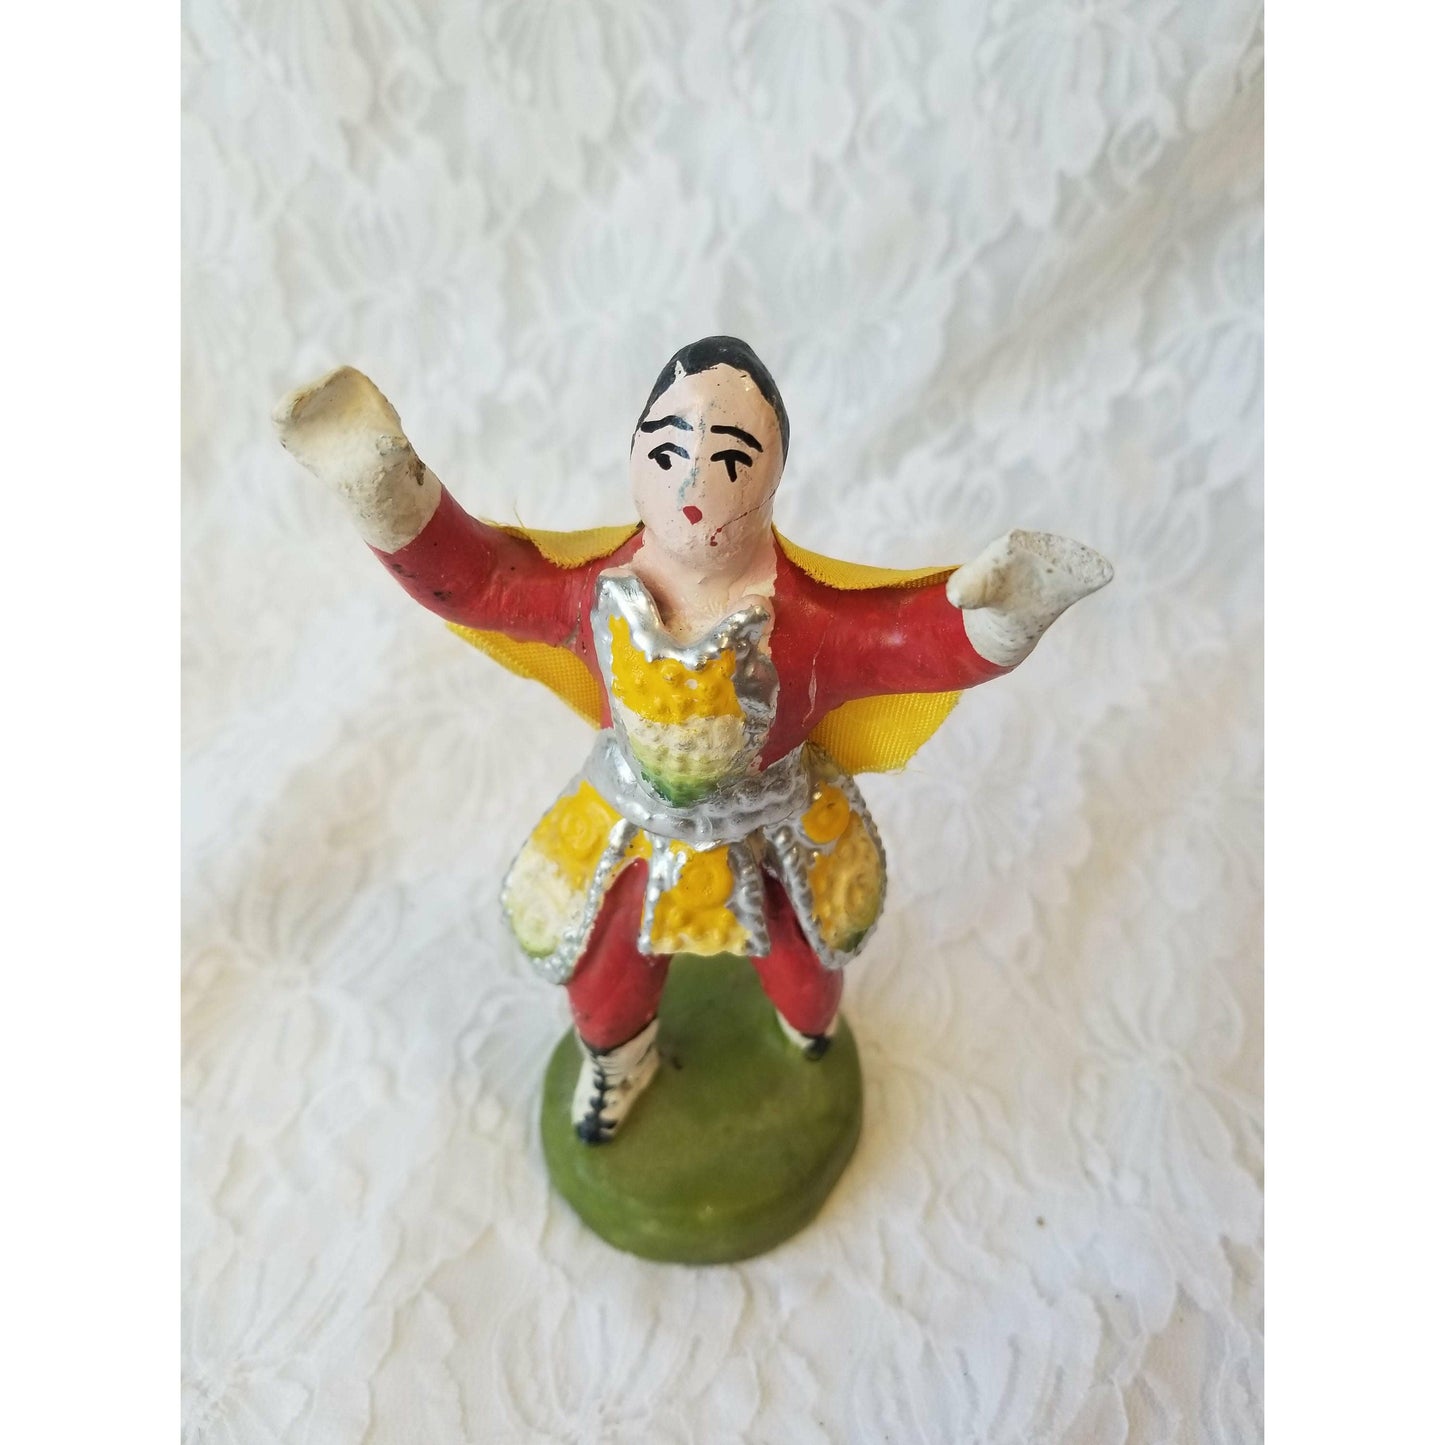 Mexican Wrestling Nacho Libre Figurine ~ Possibly Paper Mache and/or Clay ~ Made in Mexico ~ Rare and HTF Wrestler Figurine CLEARANCE